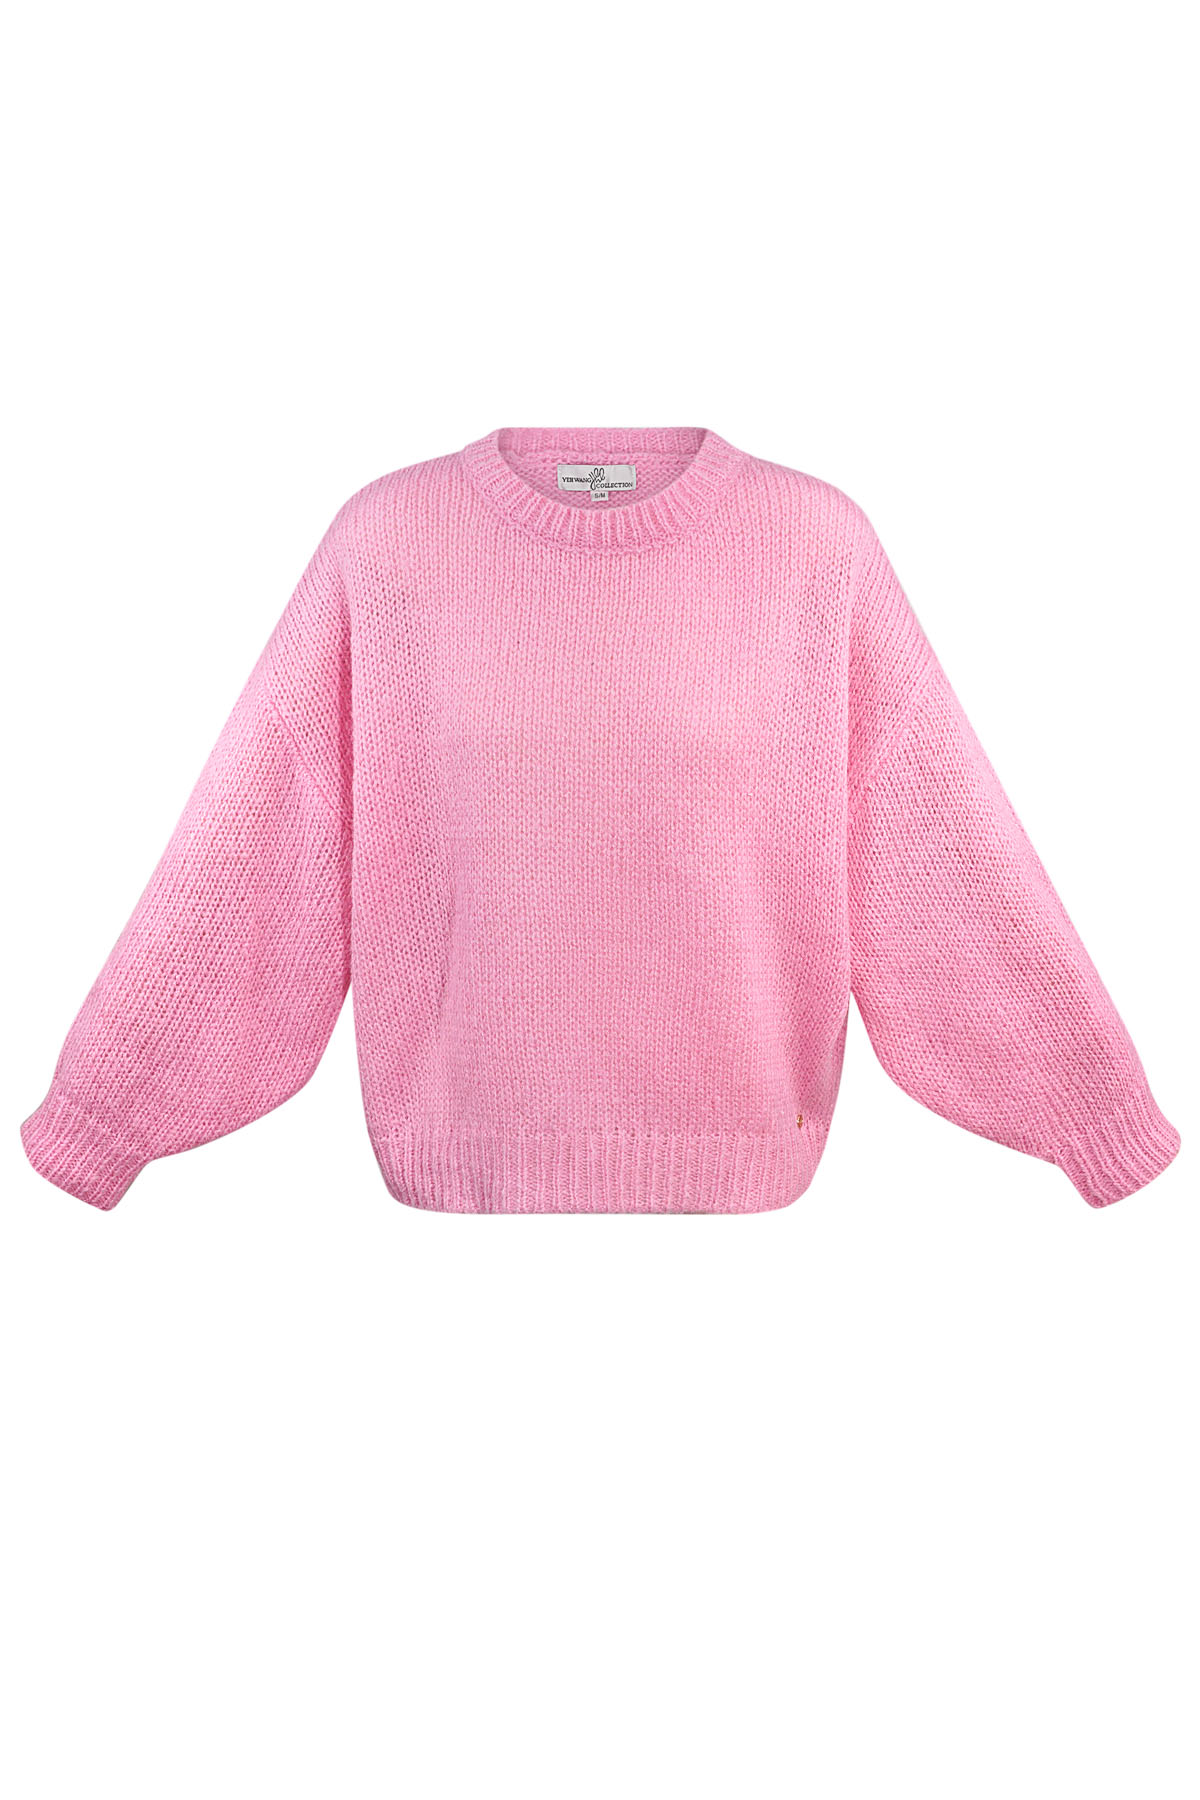 Sweater cozy - pink